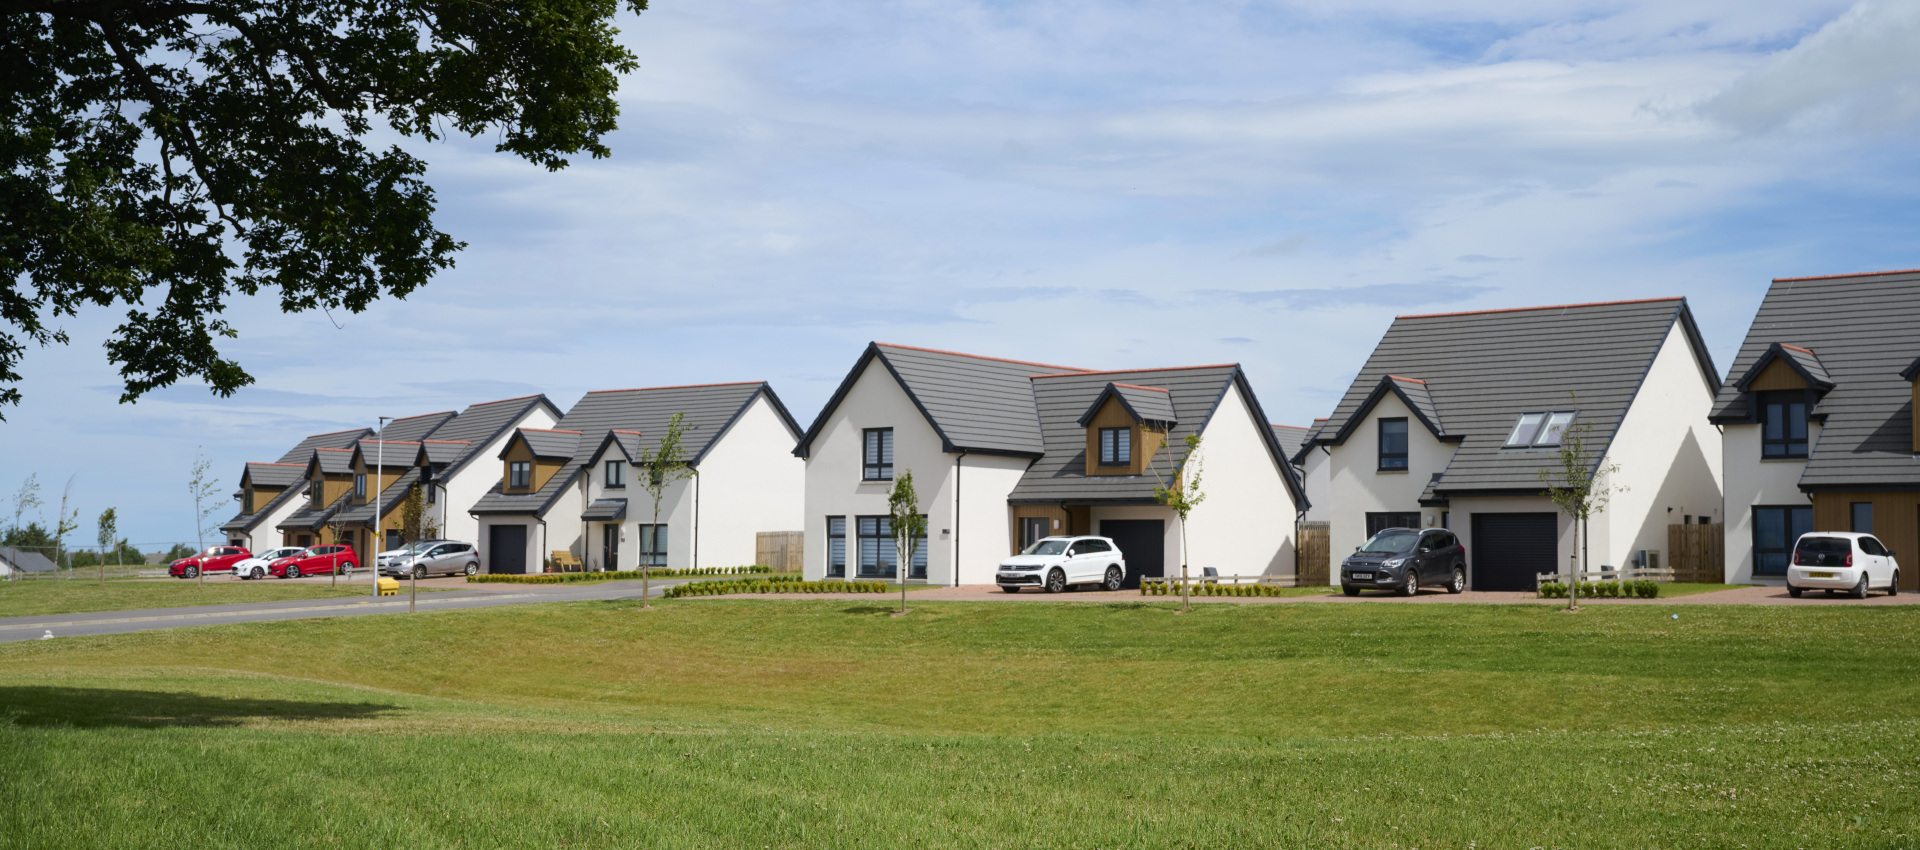 Springfield Properties New Homes In Scotland - Forres Knockomie Braes - Forres